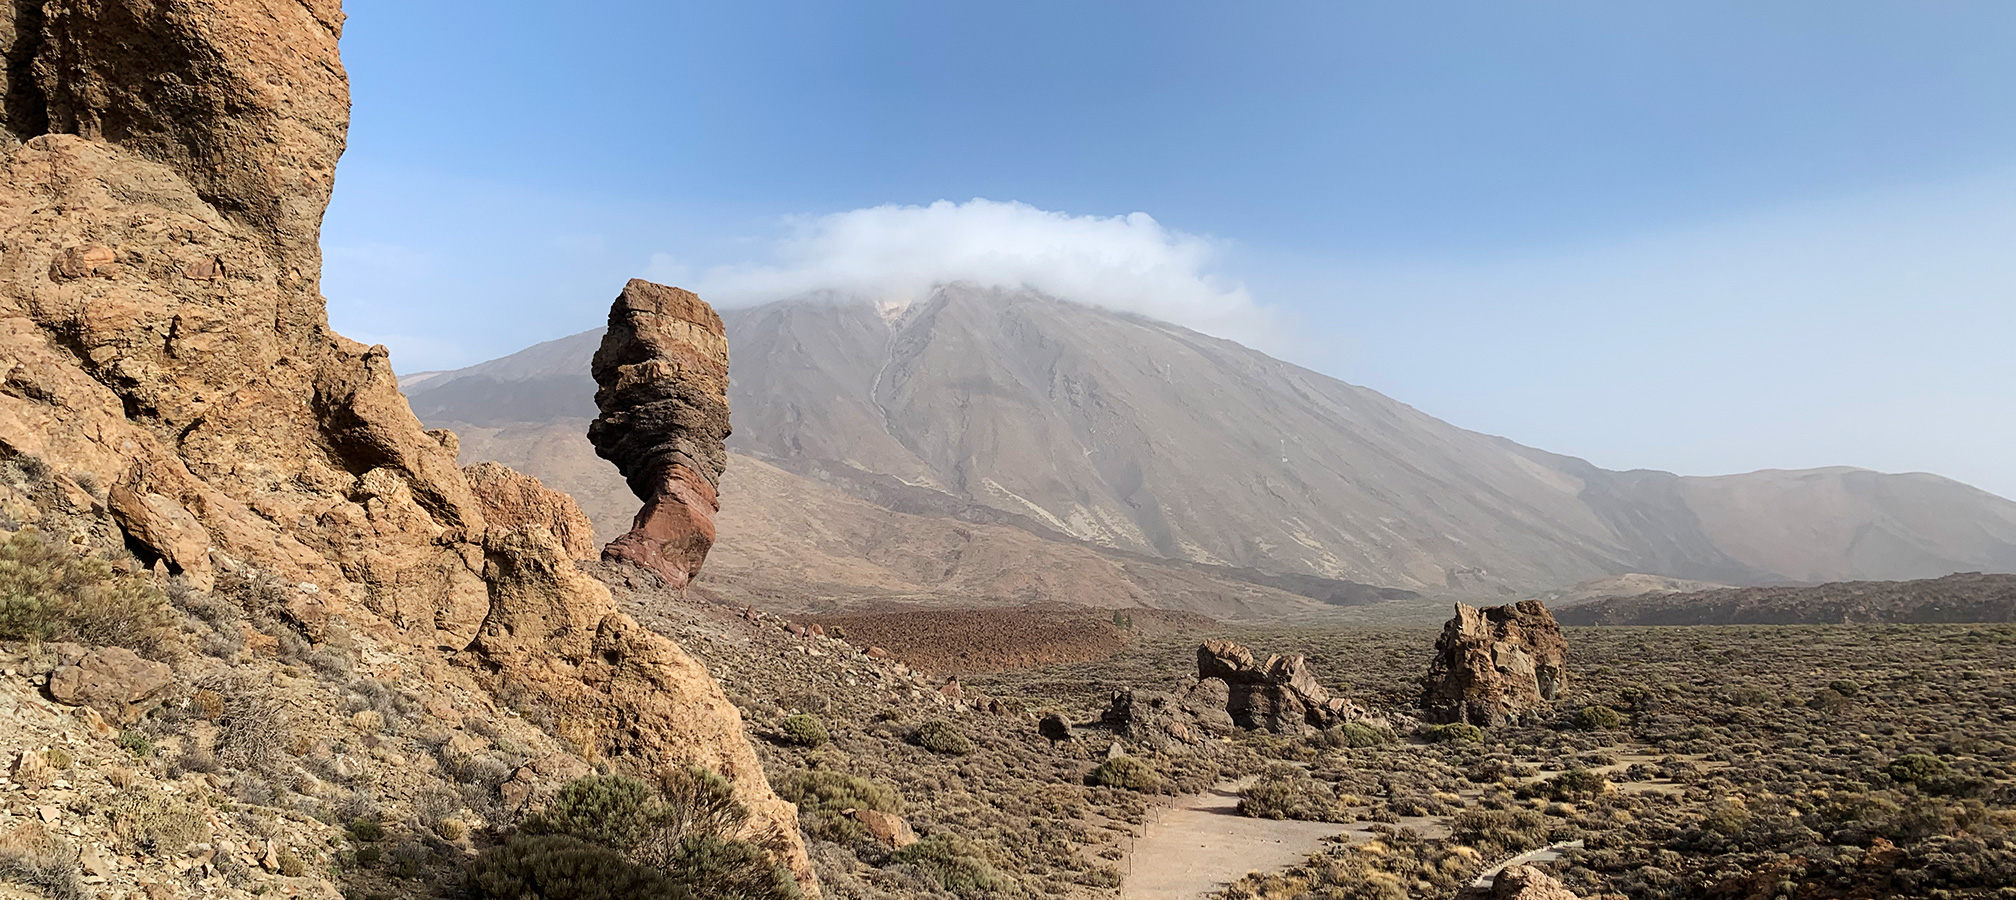 Canary Islands, Tenerife: Teide National Park. Hiking through one of the most emblematic settings of the Teide National Park: Sendero de los Roques de García